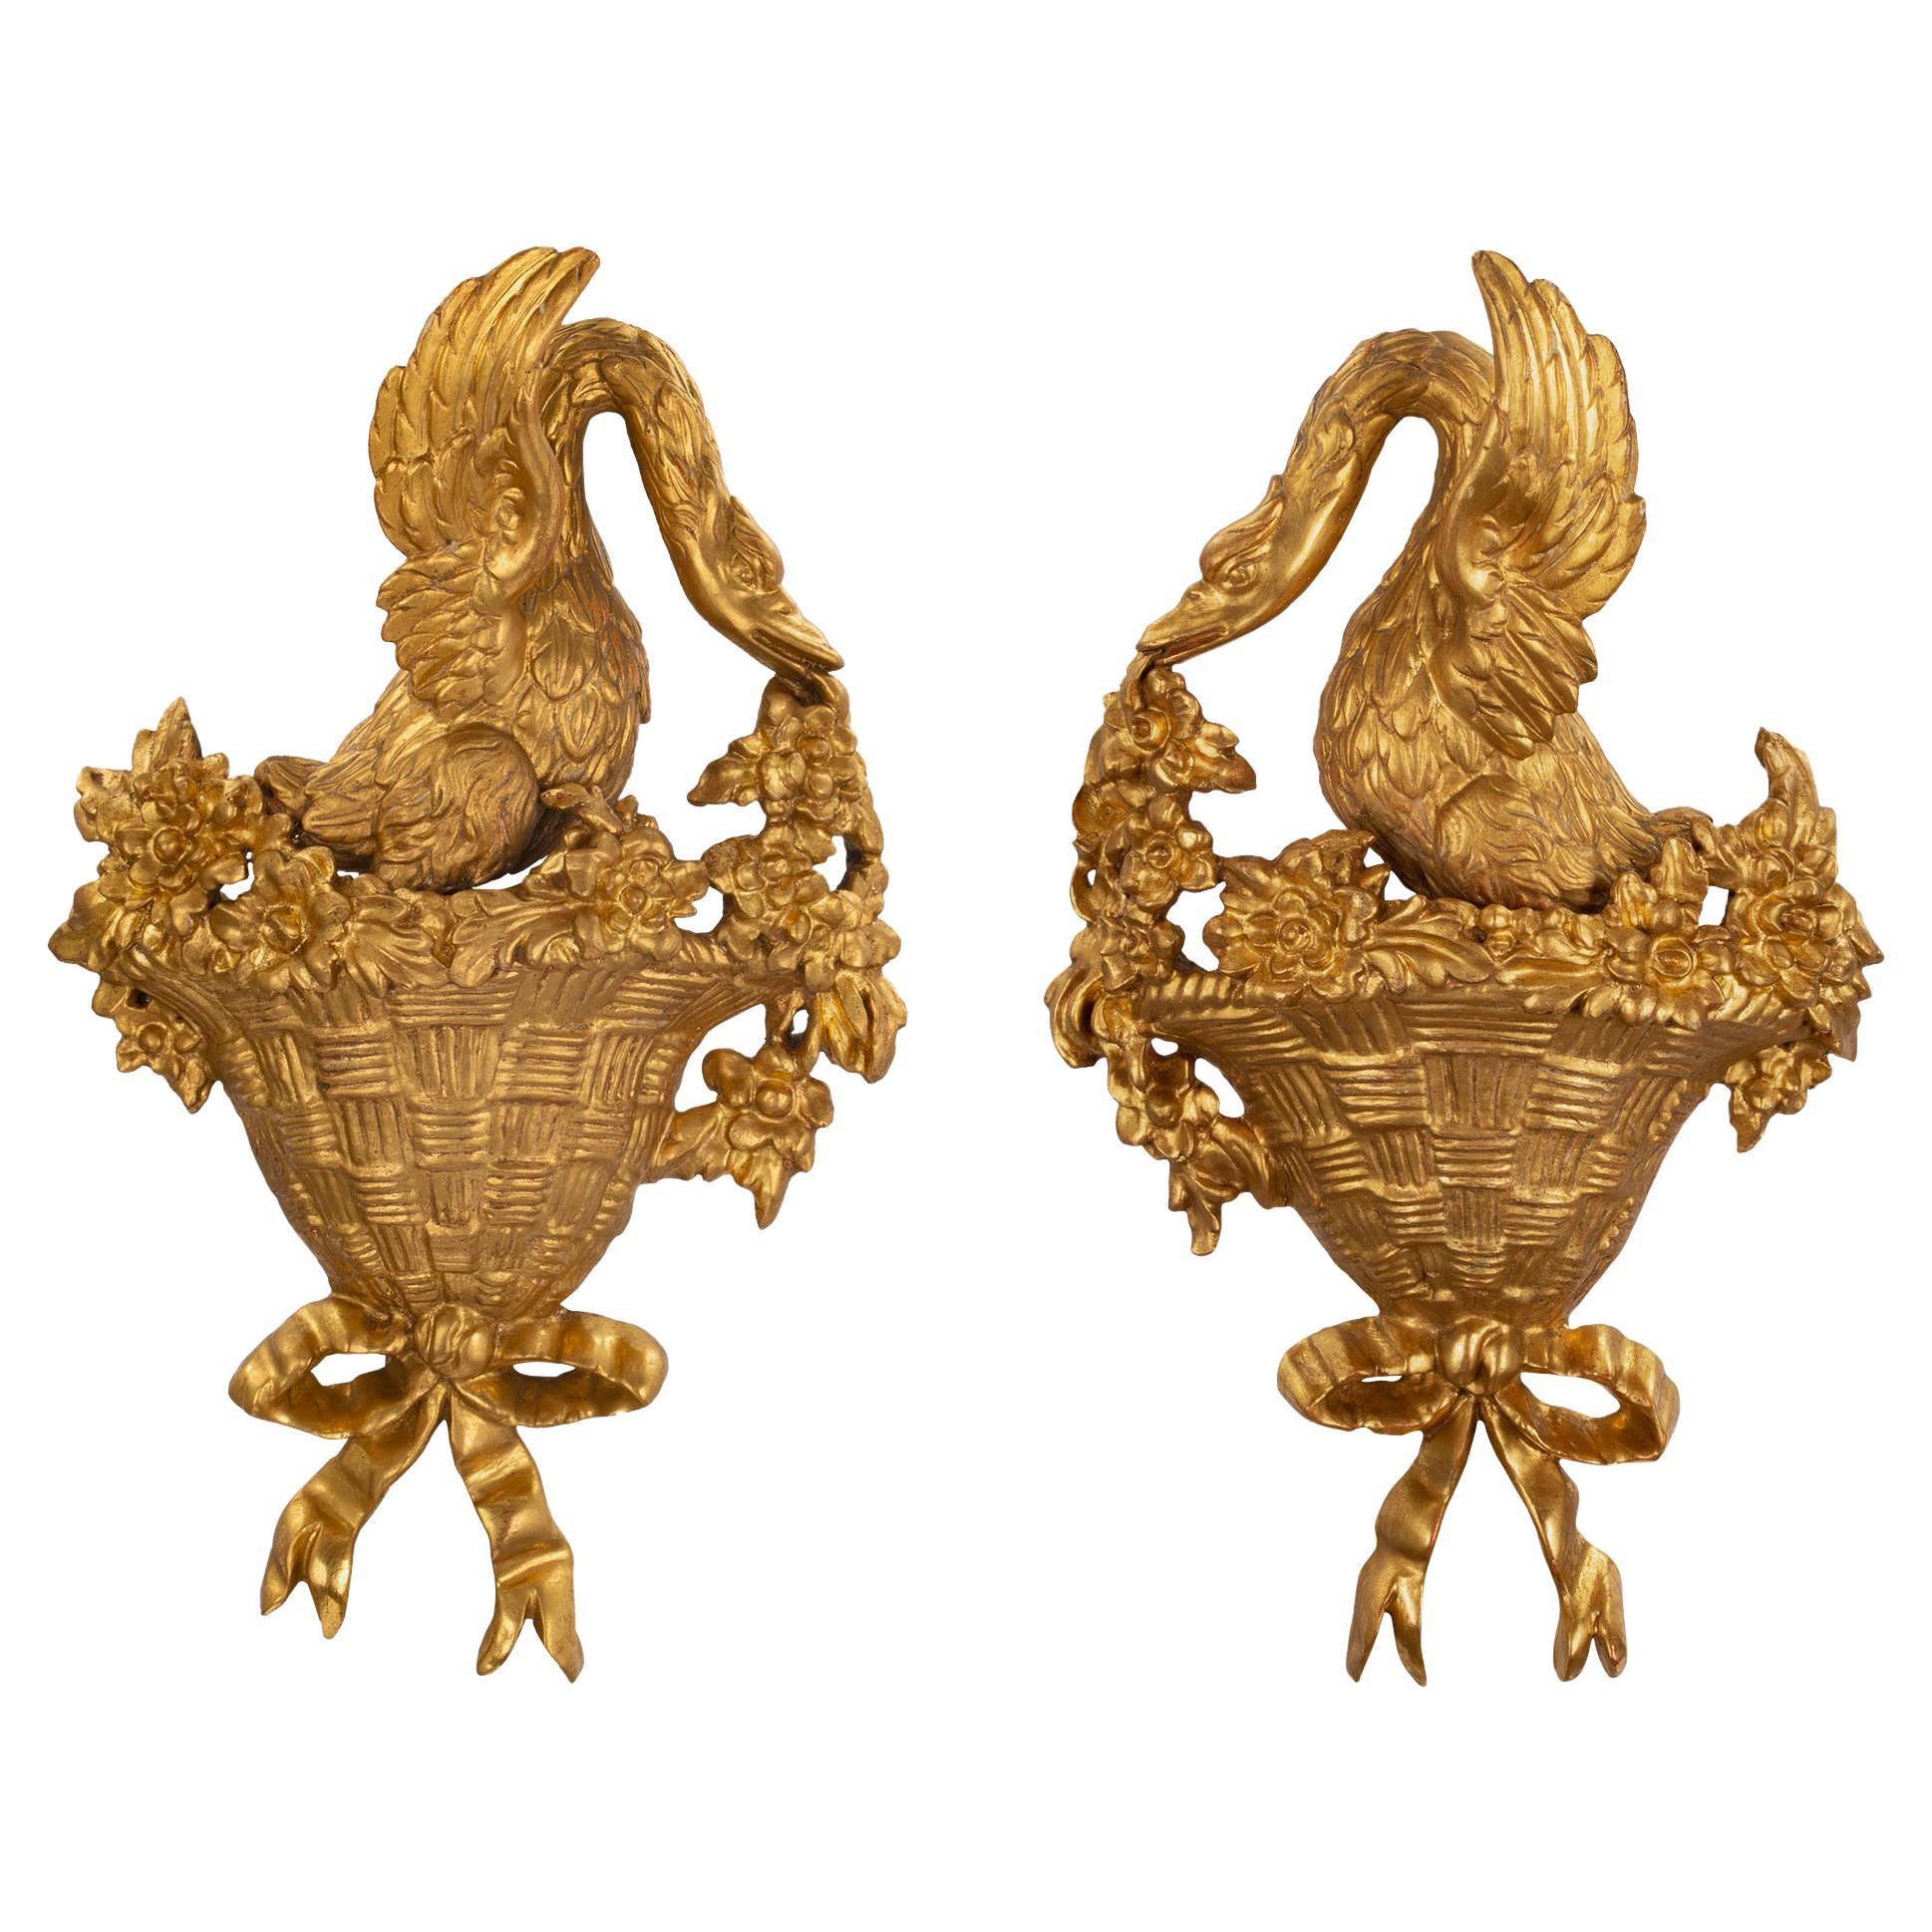 Pair of Italian Louis XVI St. Carved Giltwood Wall Decor